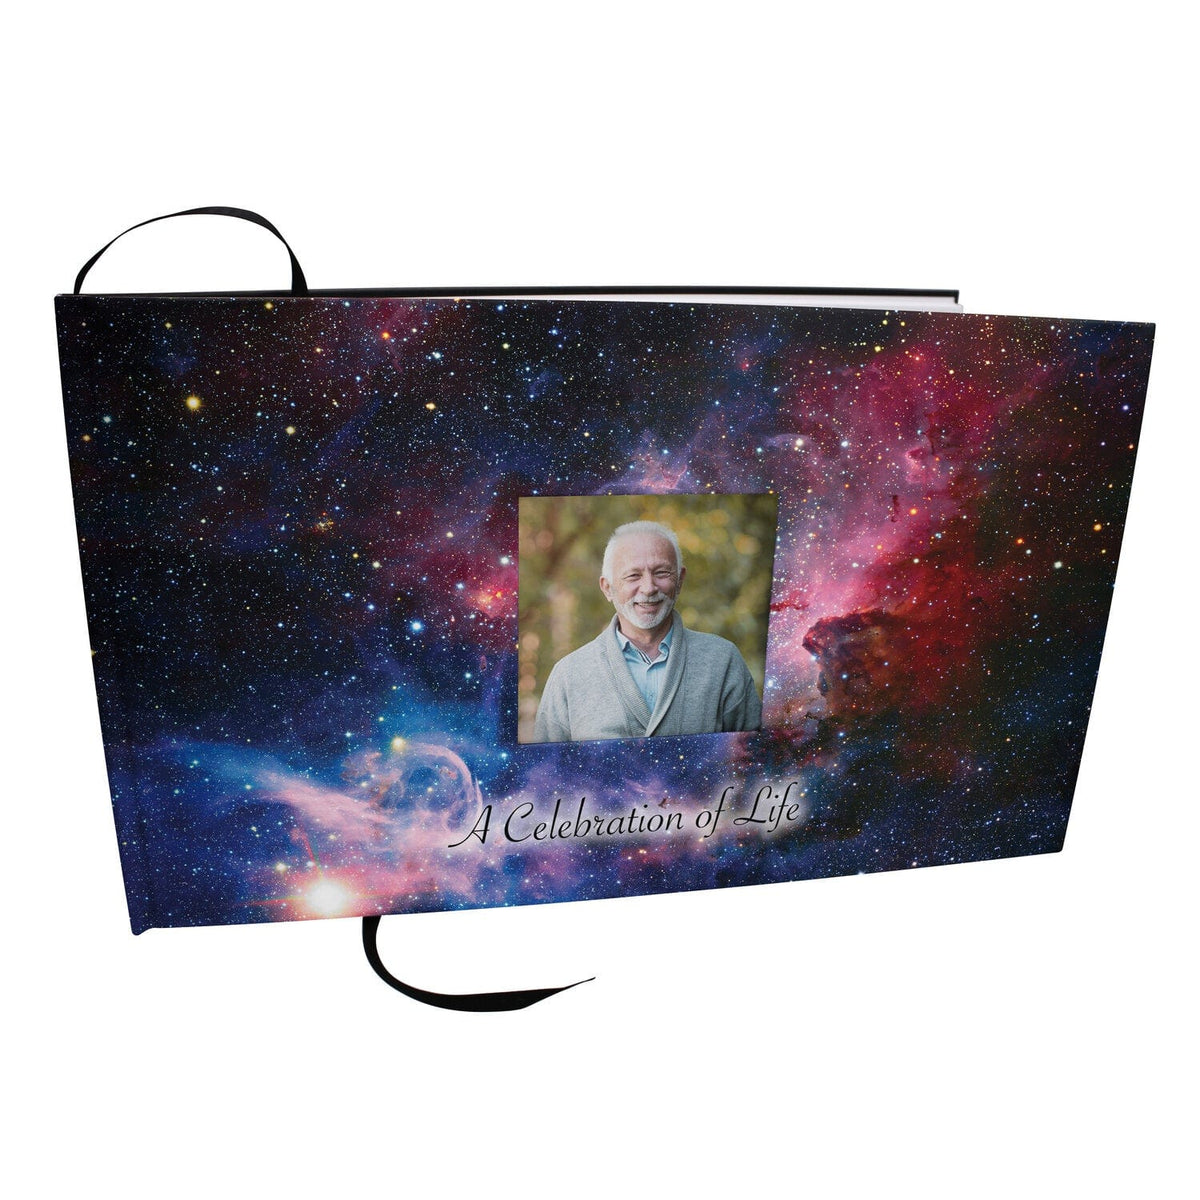 Commemorative Cremation Urns Home &amp; Garden Cosmic Galaxy Matching Themed &#39;Celebration of Life&#39; Guest Book for Funeral or Memorial Service